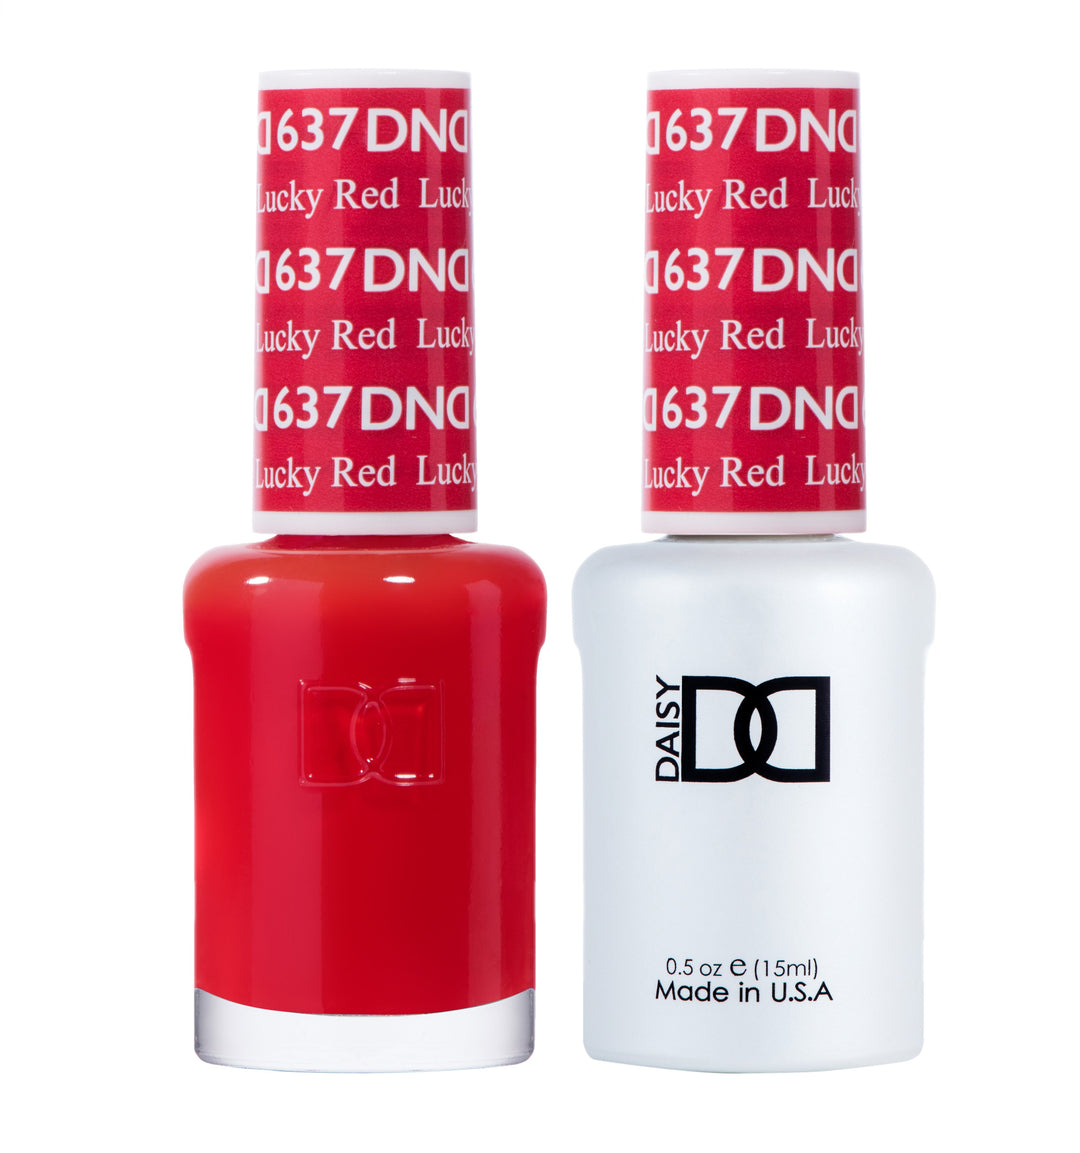 DND DUO Nail Lacquer and UV|LED Gel Polish Lucky Red 637 (2 x 15ml)